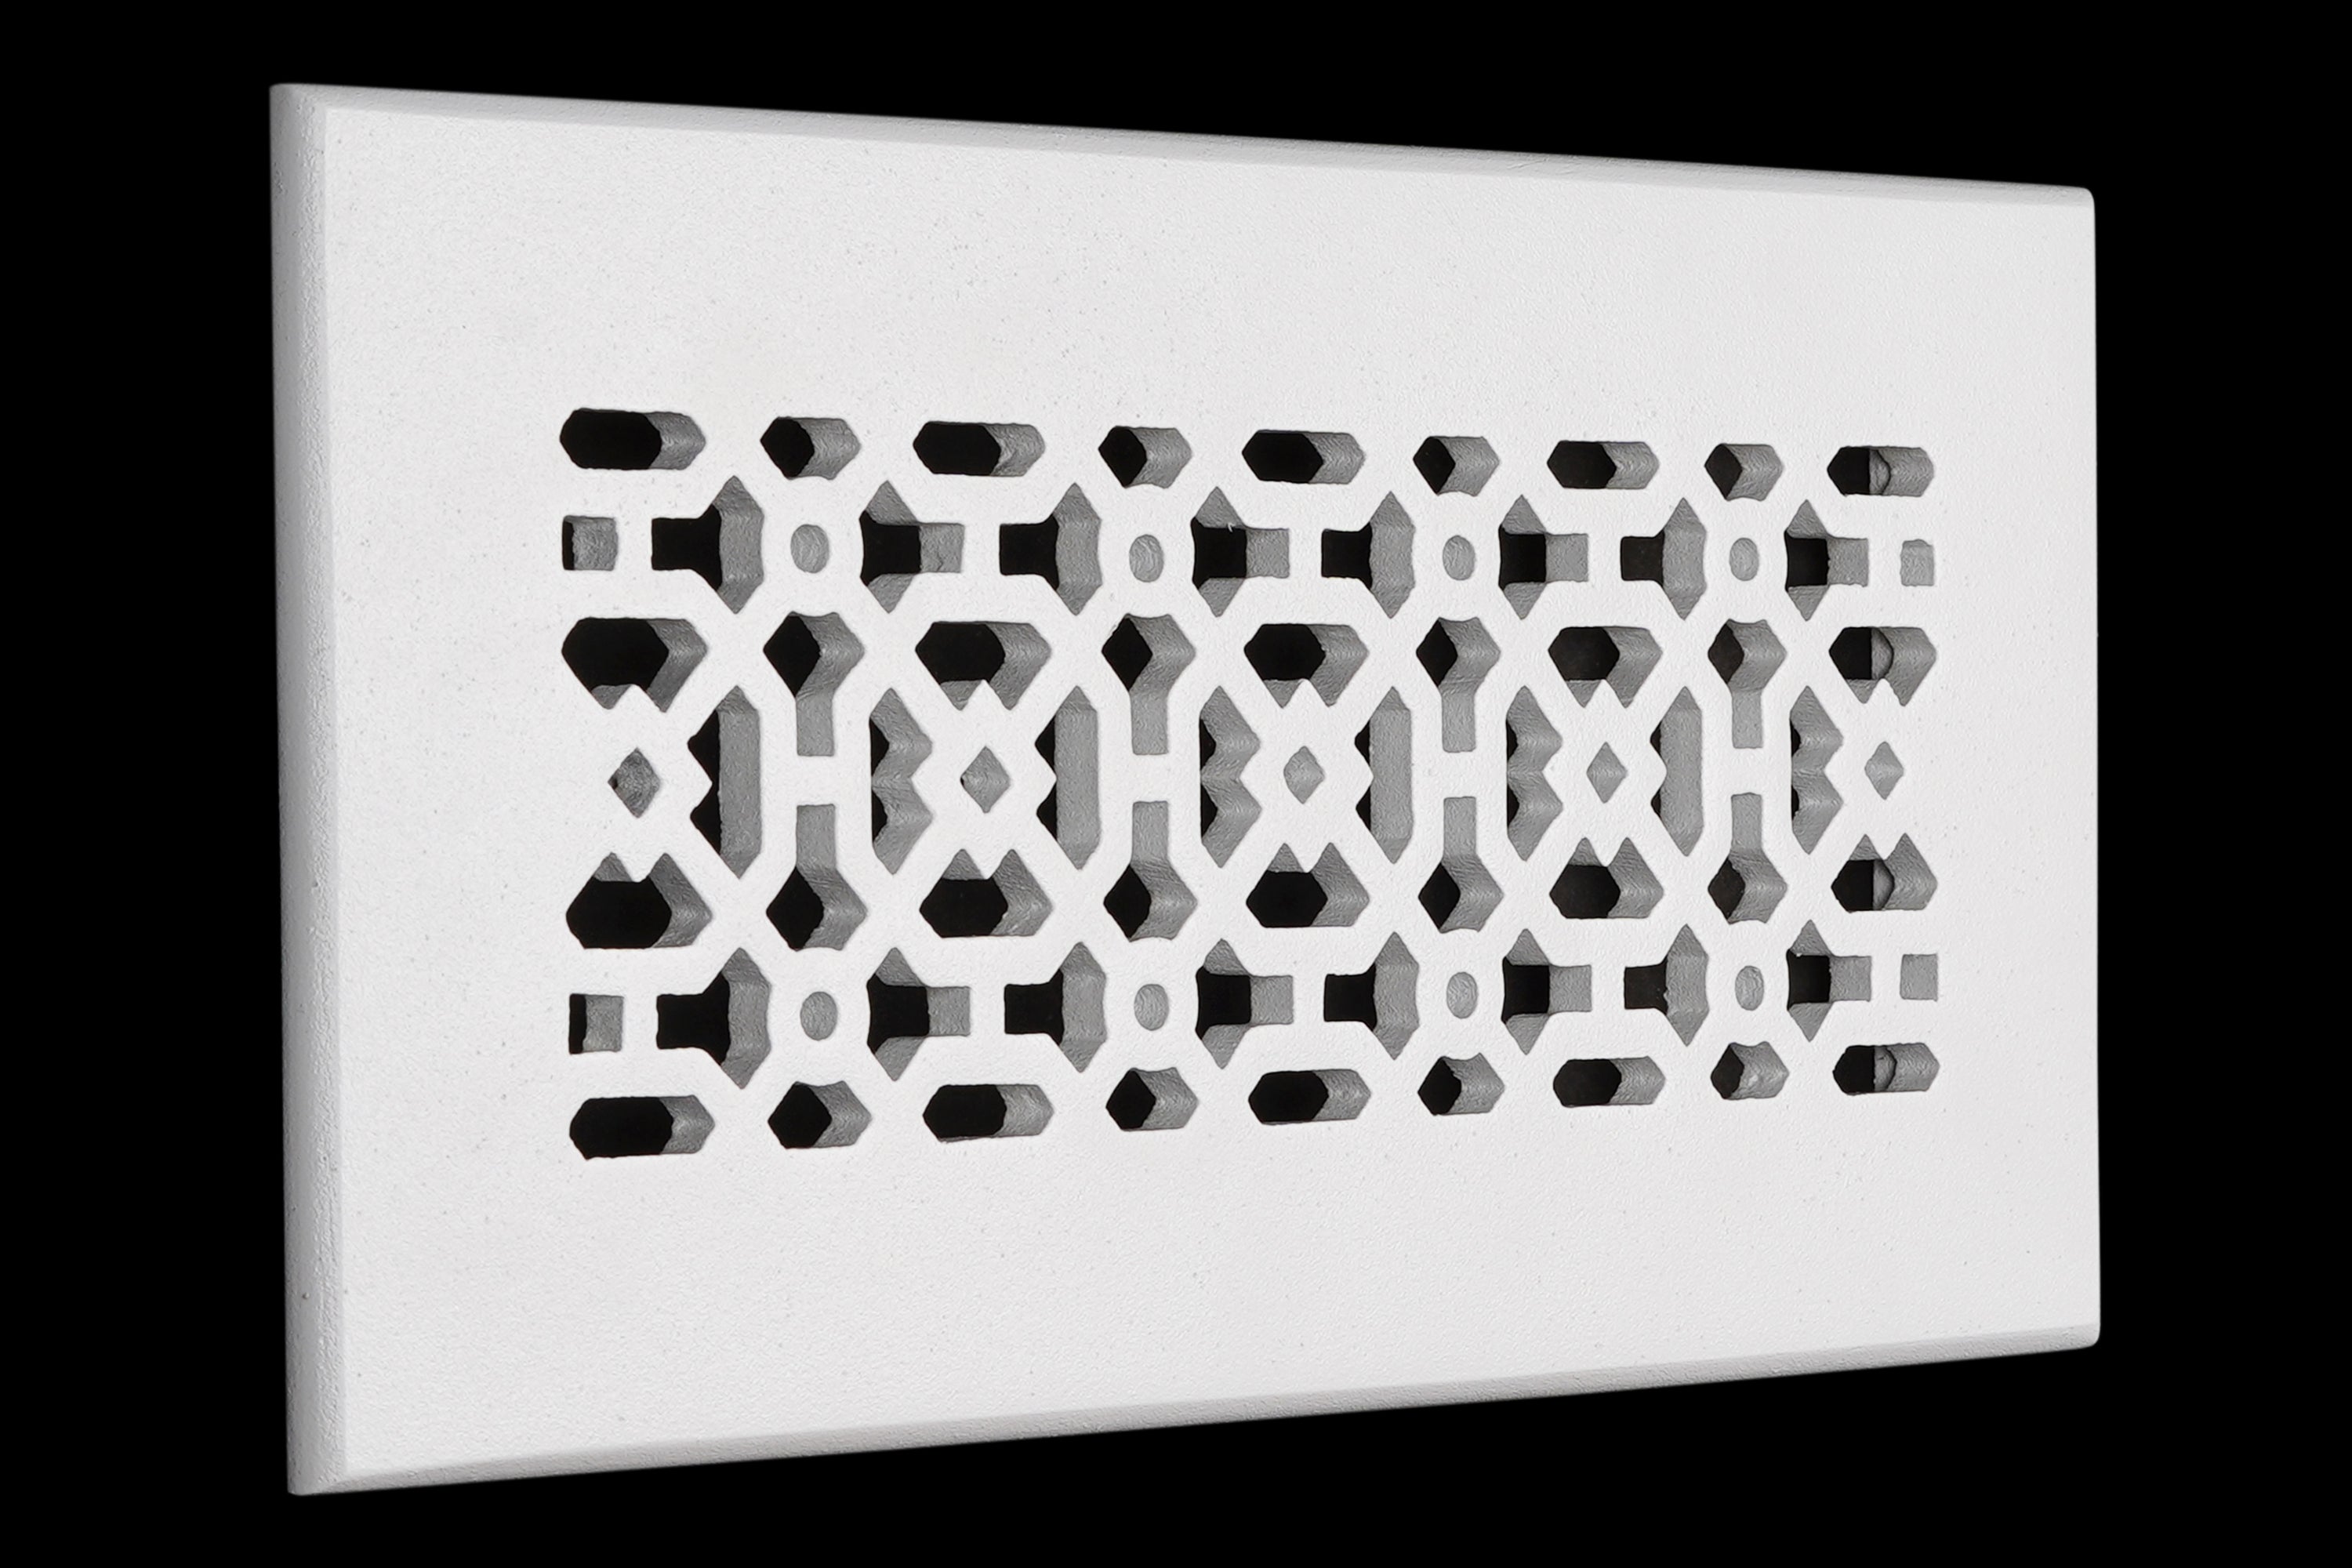 Achtek AIR RETURN 4"x10" Duct Opening (Overall Size 6"x12") | Heavy Cast Aluminum Air Grille / HVAC Duct Cover || Powder Coated